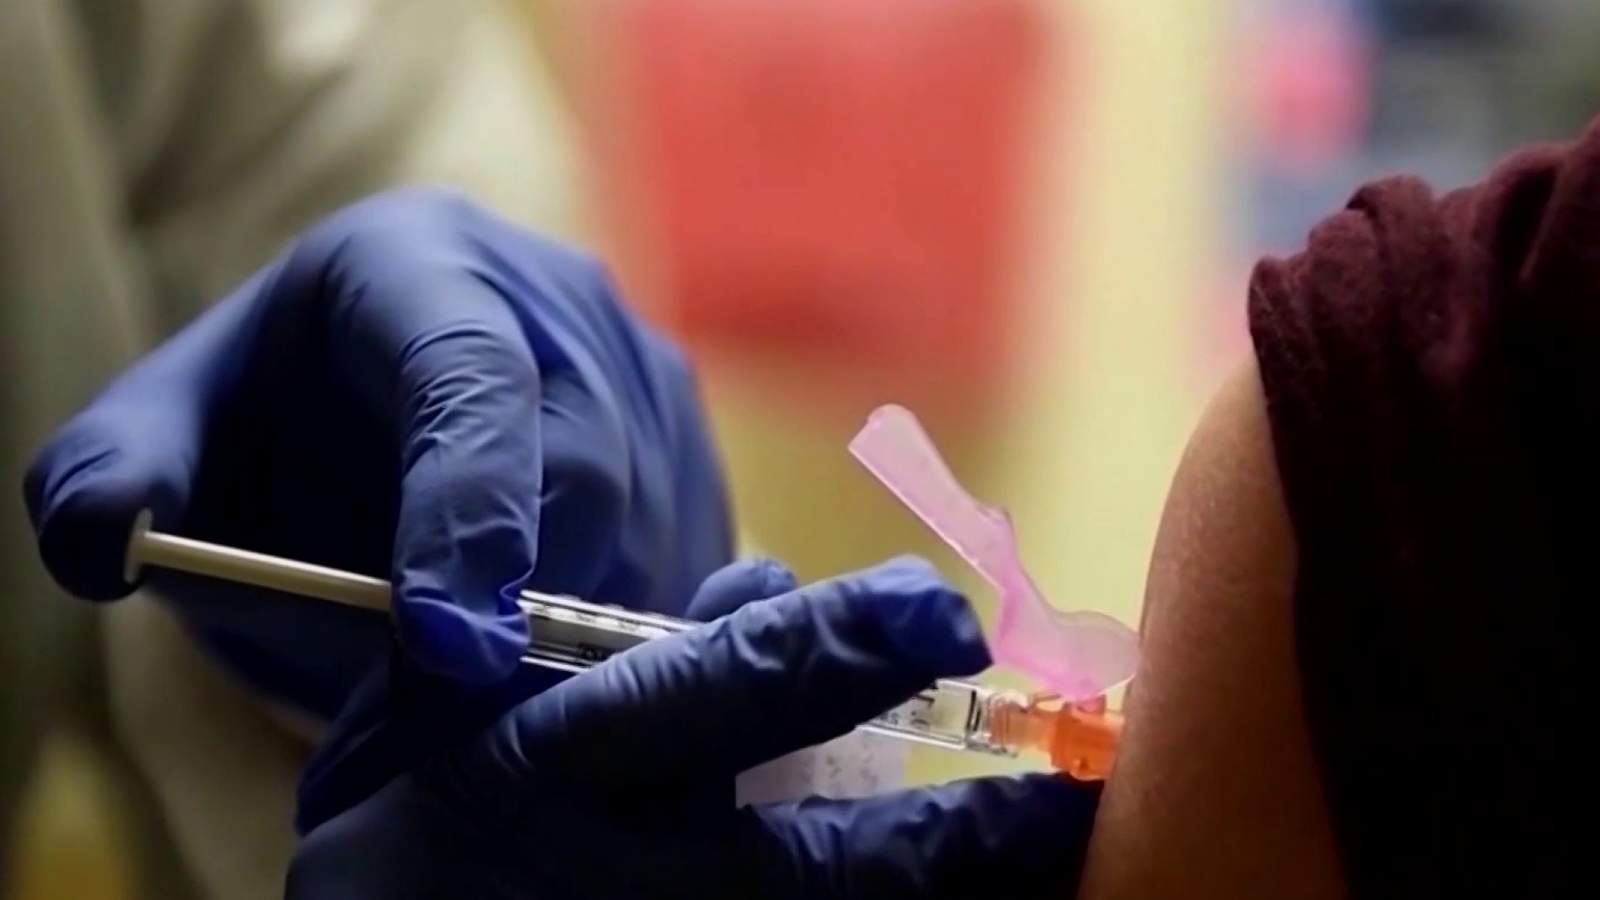 Orlando doctor says skipping coronavirus vaccine is like ‘playing Russian roulette’ as hesitancy persists